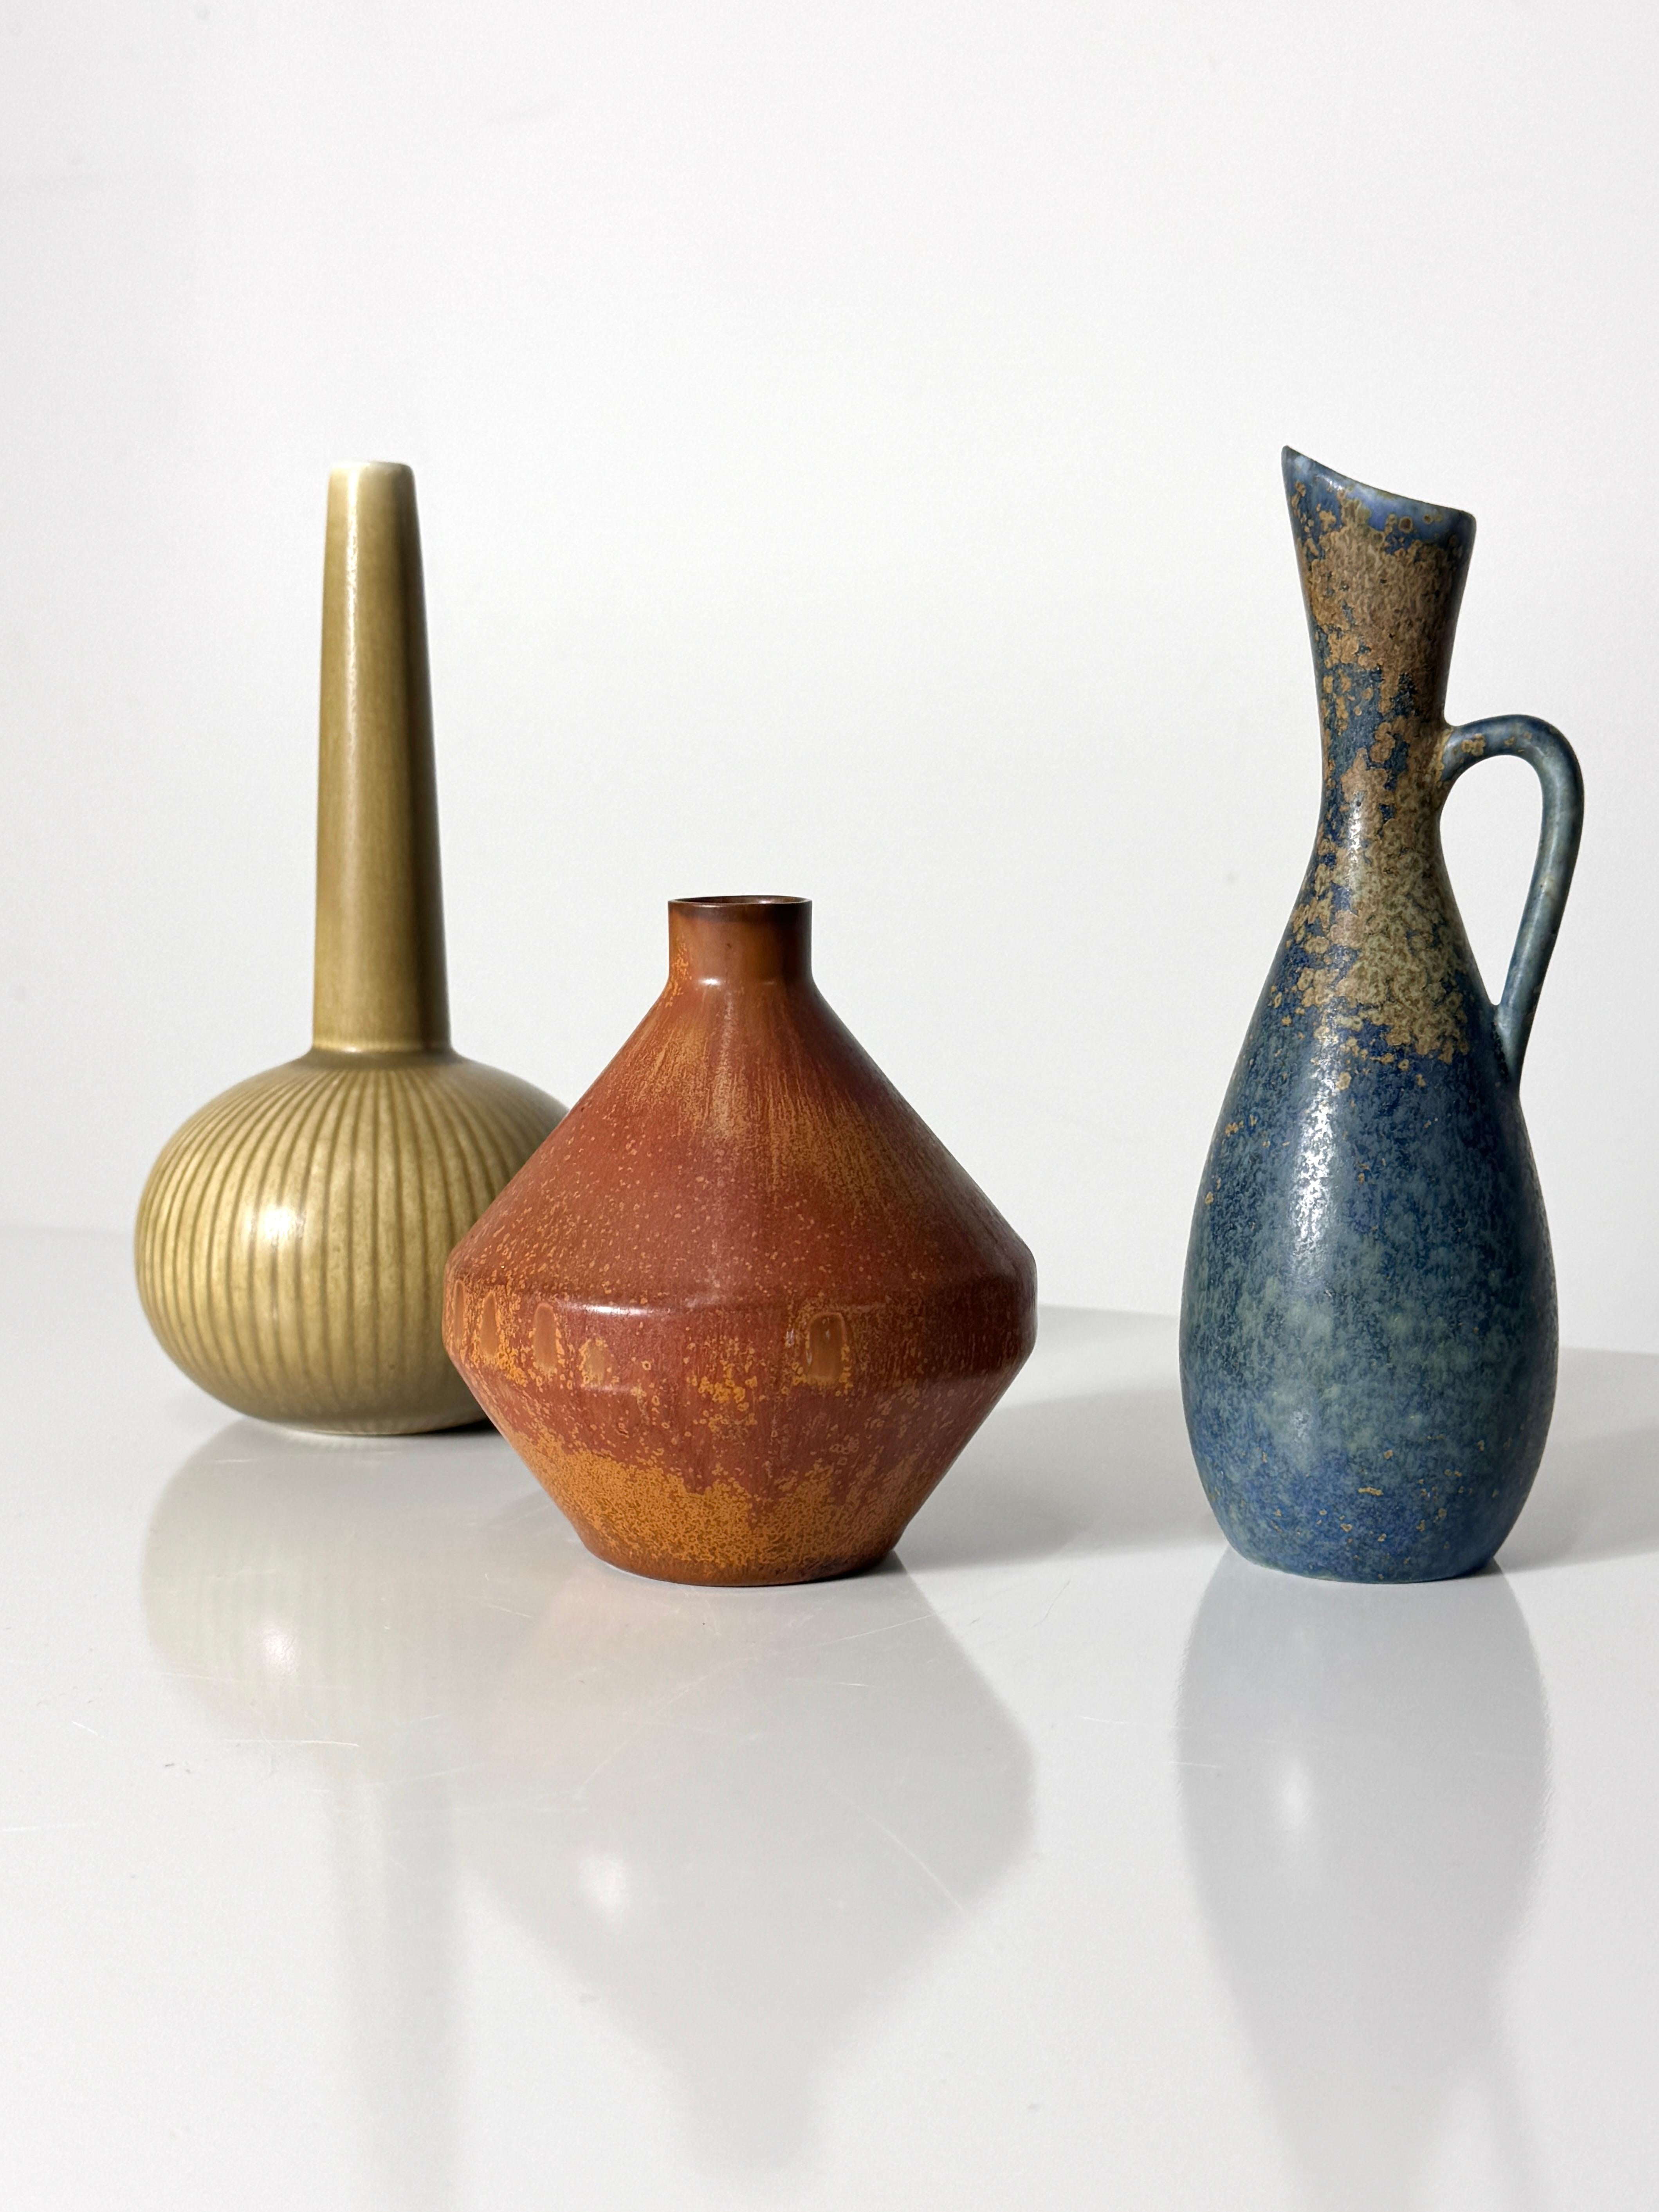 Superb grouping of three ceramic vessels by Rörstrand Sweden 
Circa 1950s

Pitcher form SYE vase in muted blue glaze by Carl-Harry Stalhane
4 inch diameter  4.5 inch height

Rust glaze SOU bud vase by Carl-Harry Stalhane
2.75 inch diameter  7.375